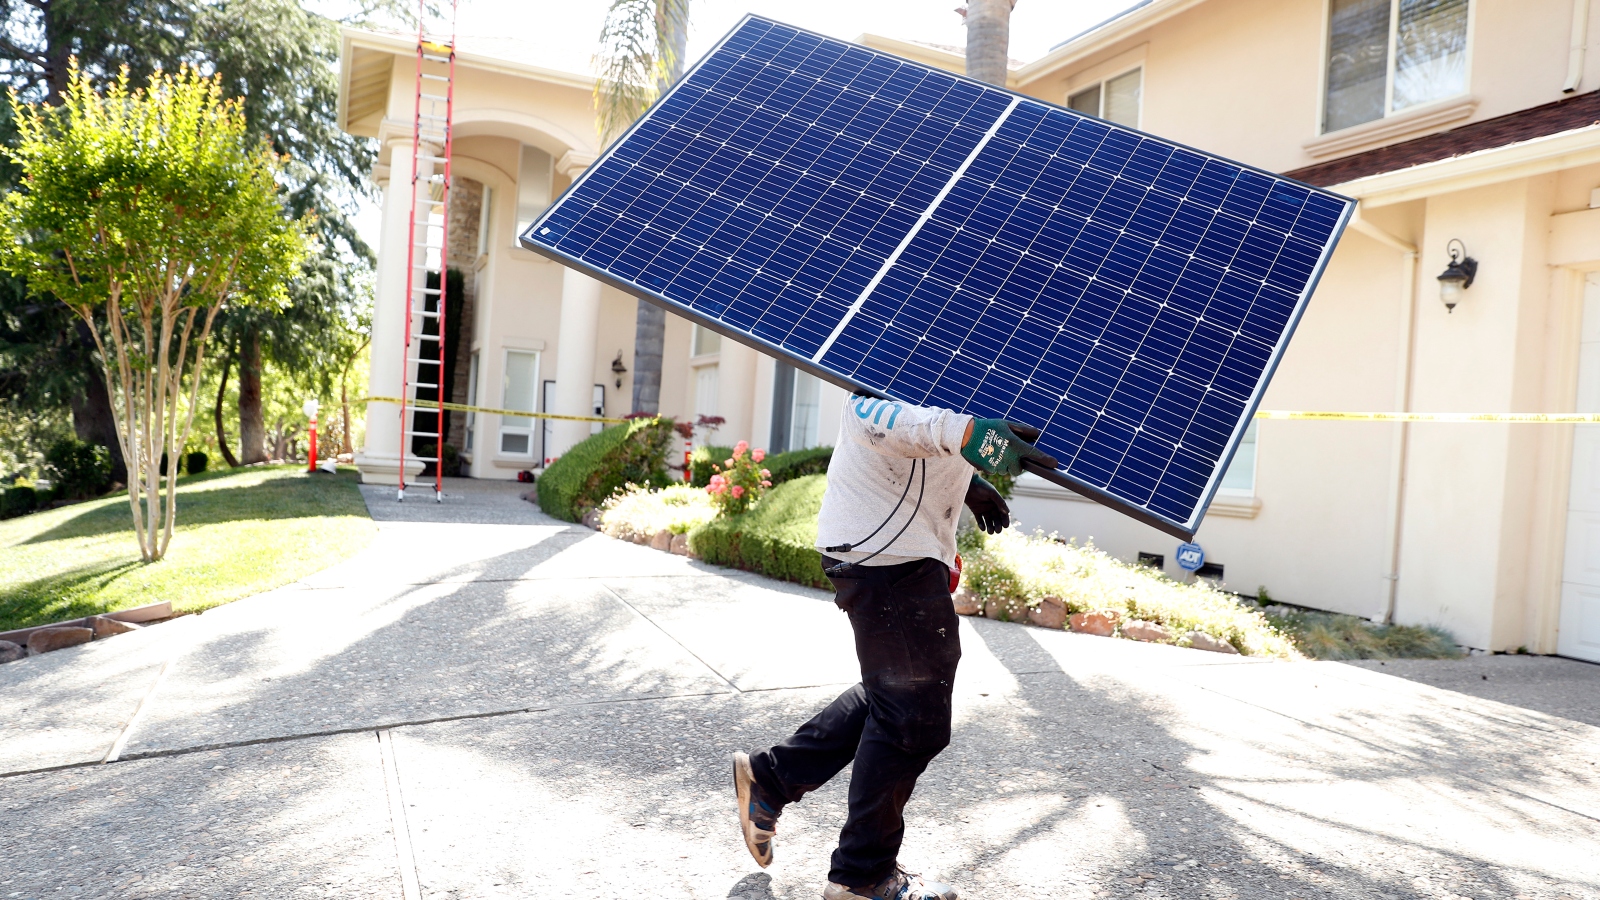 Sunrun employee Gonzalo Najera carries a solar panel before installation at a home in Alamo, Calif. on Monday, May 17, 2021.